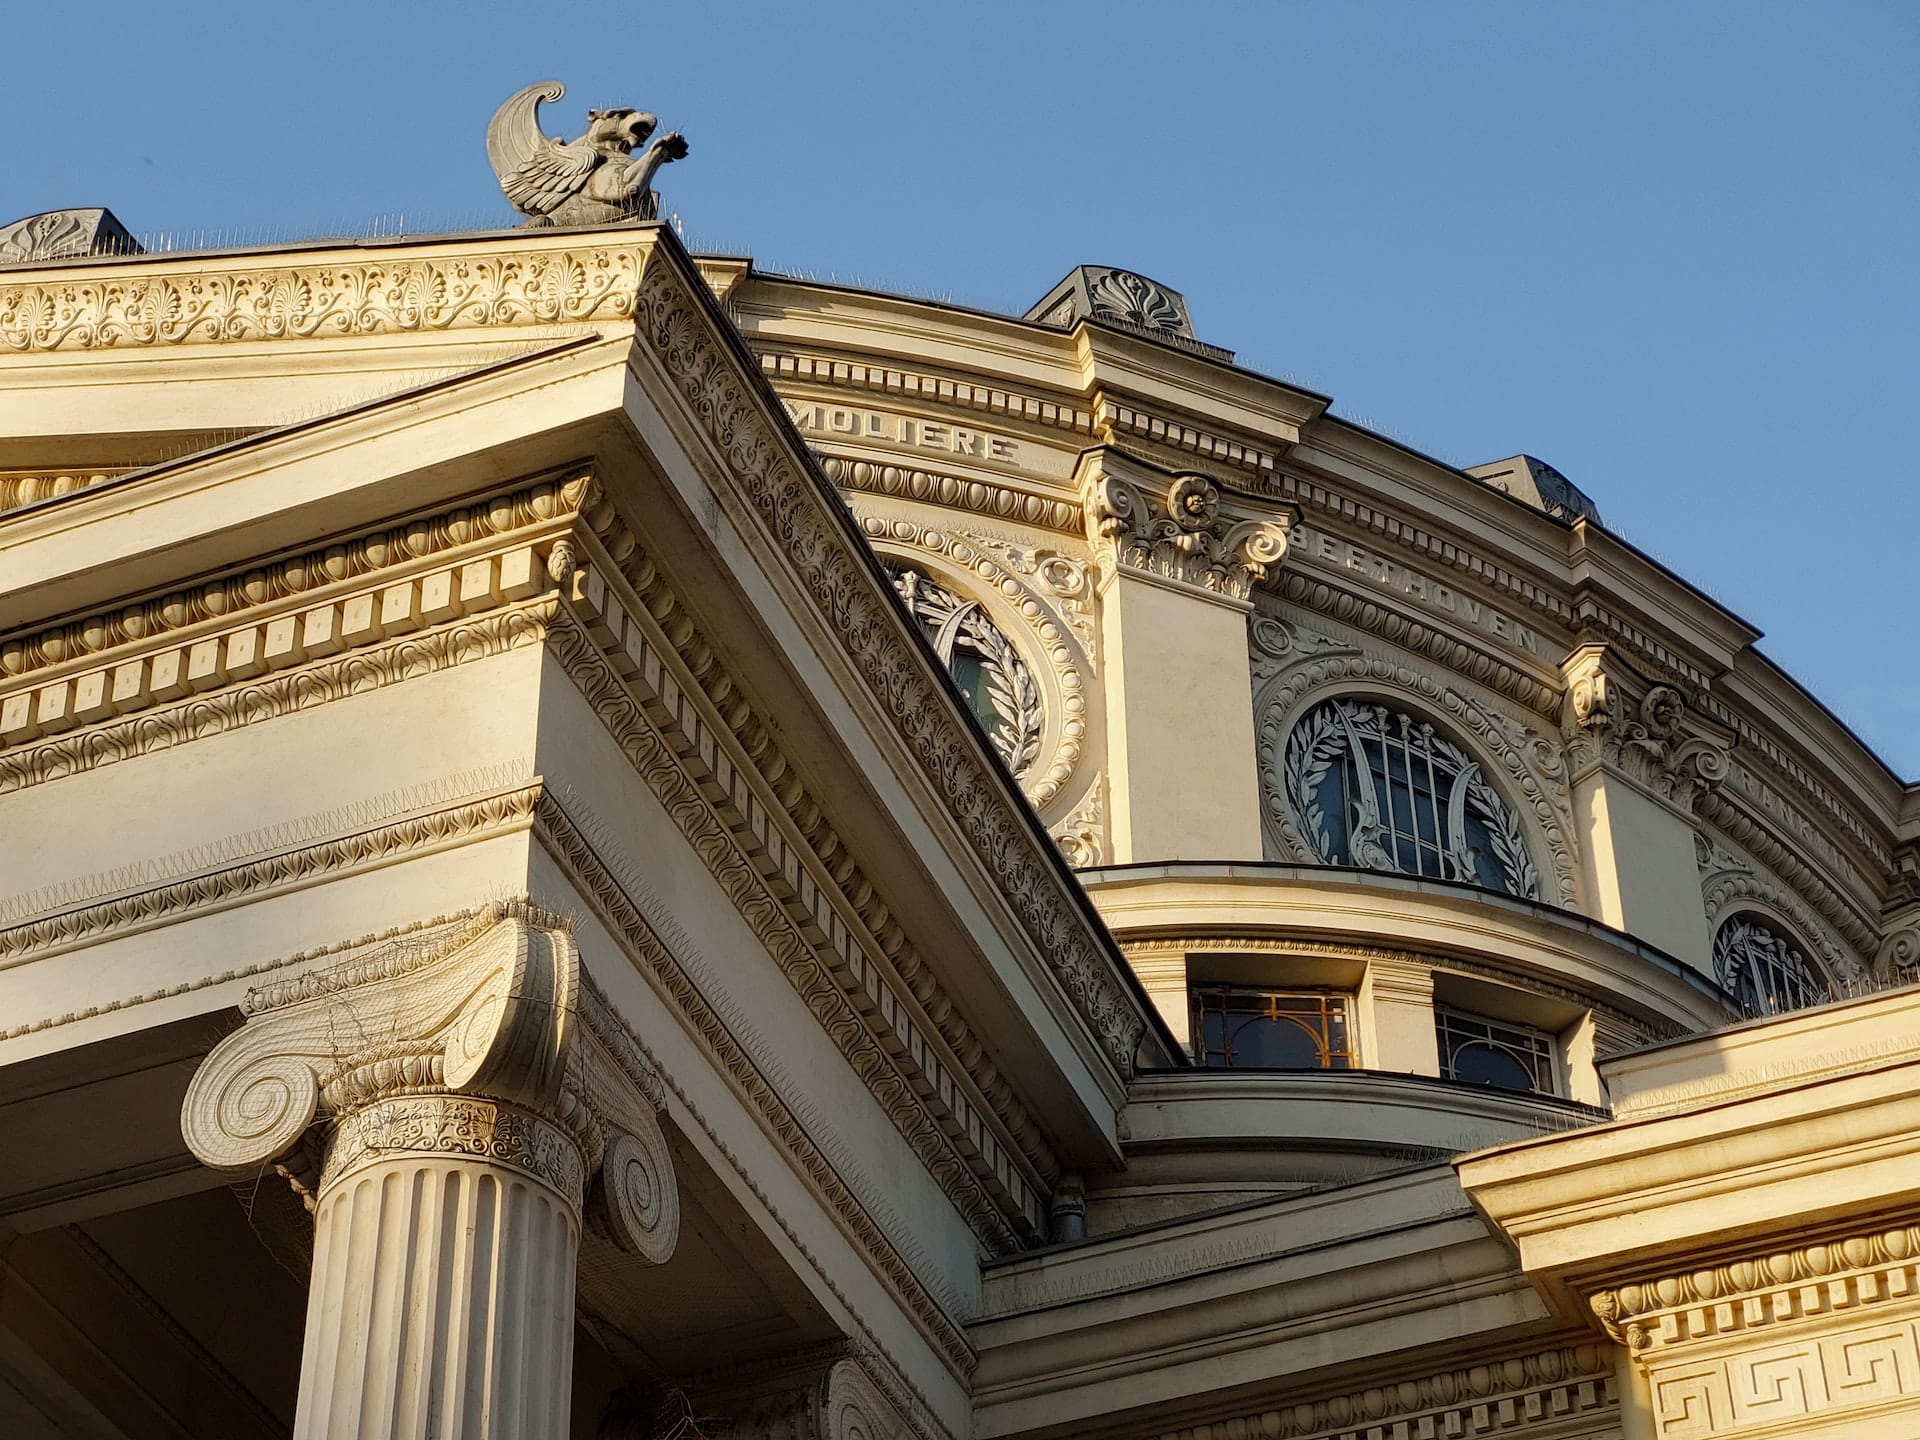 With dozens of attractions including the Romanian National Museum of Art, Romanian Athenaeum and Grigore Antipa National Museum of Natural History, Sector 1 is one of the most important cultural districts in Europe